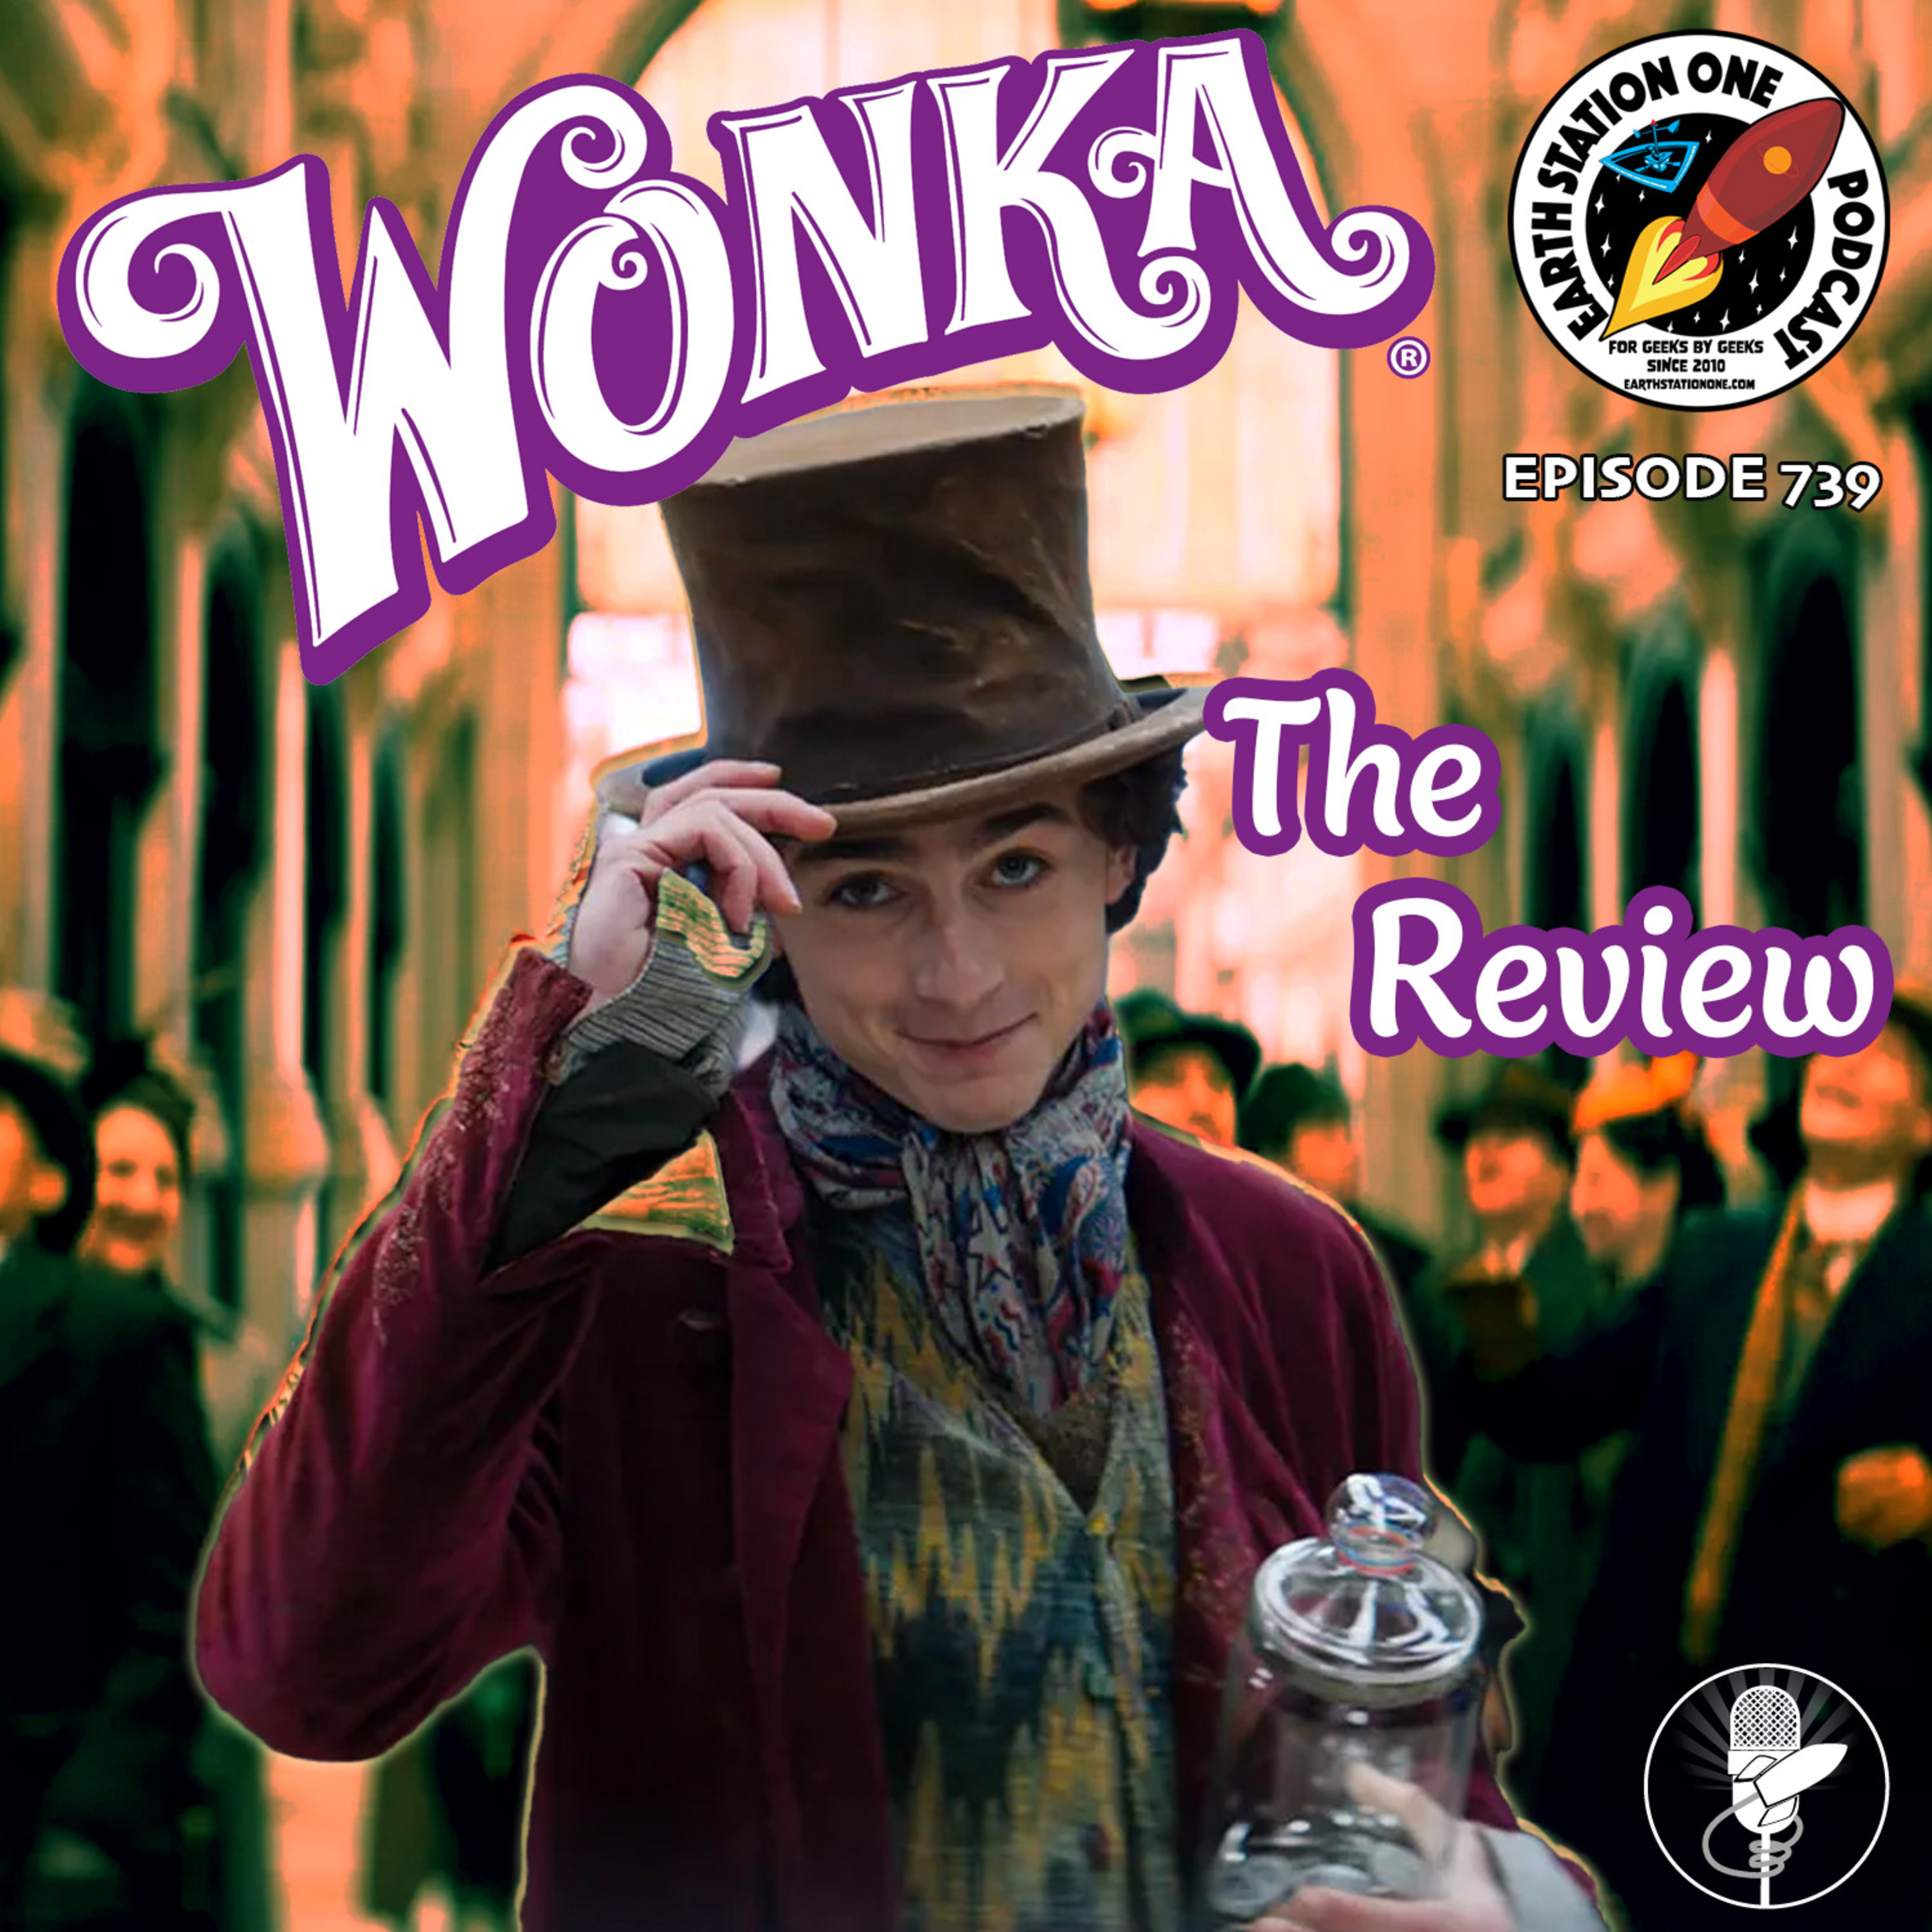 Wonka Movie Review | The Earth Station One Podcast